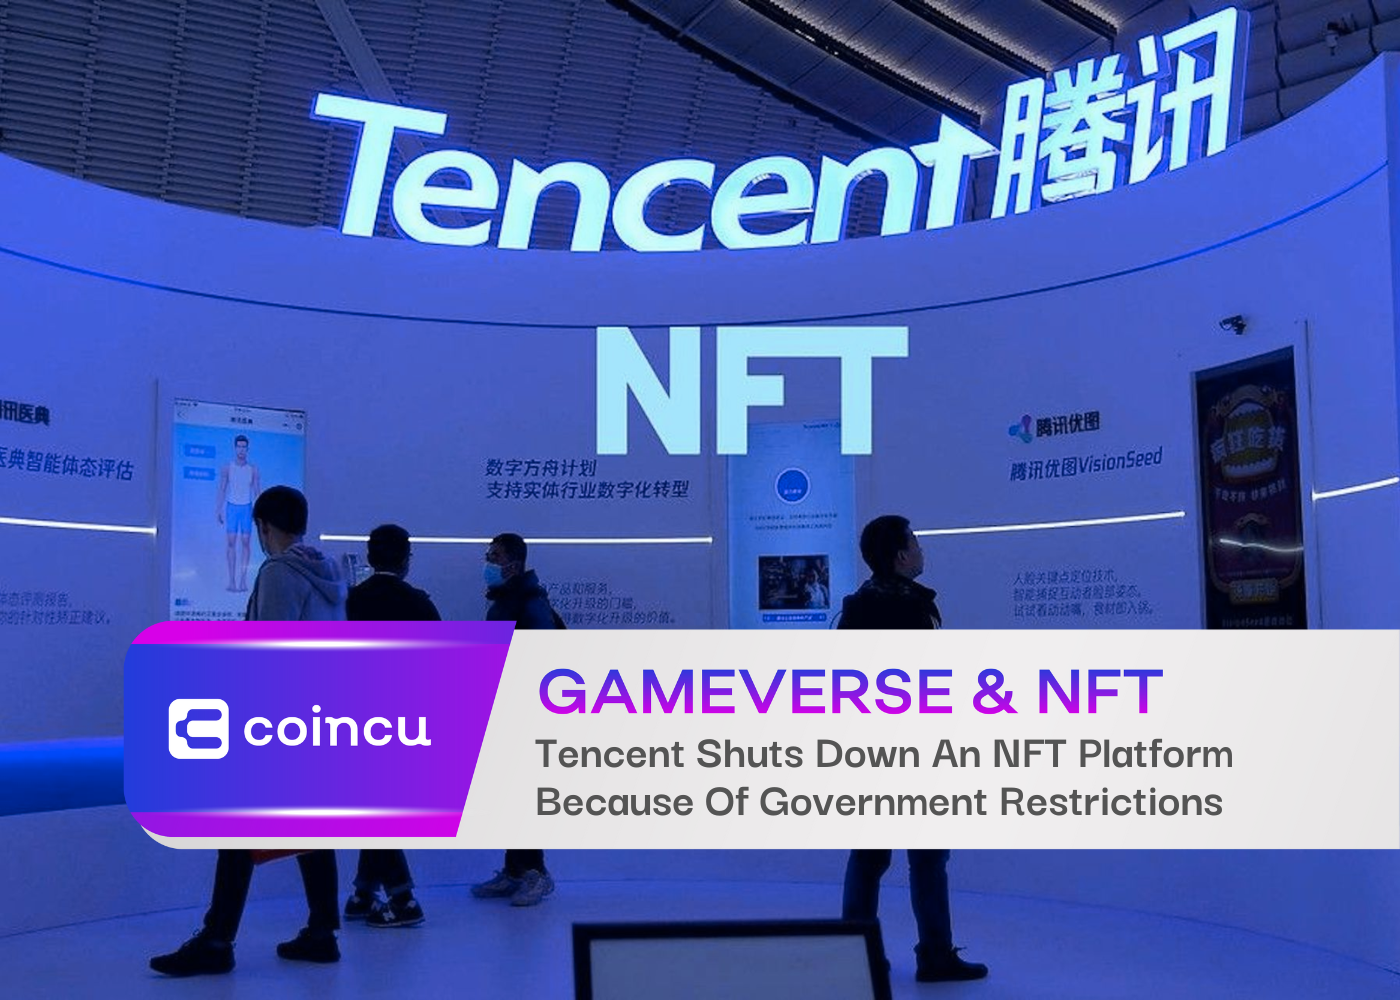 Tencent Shuts Down An NFT Platform Because Of Government Restrictions